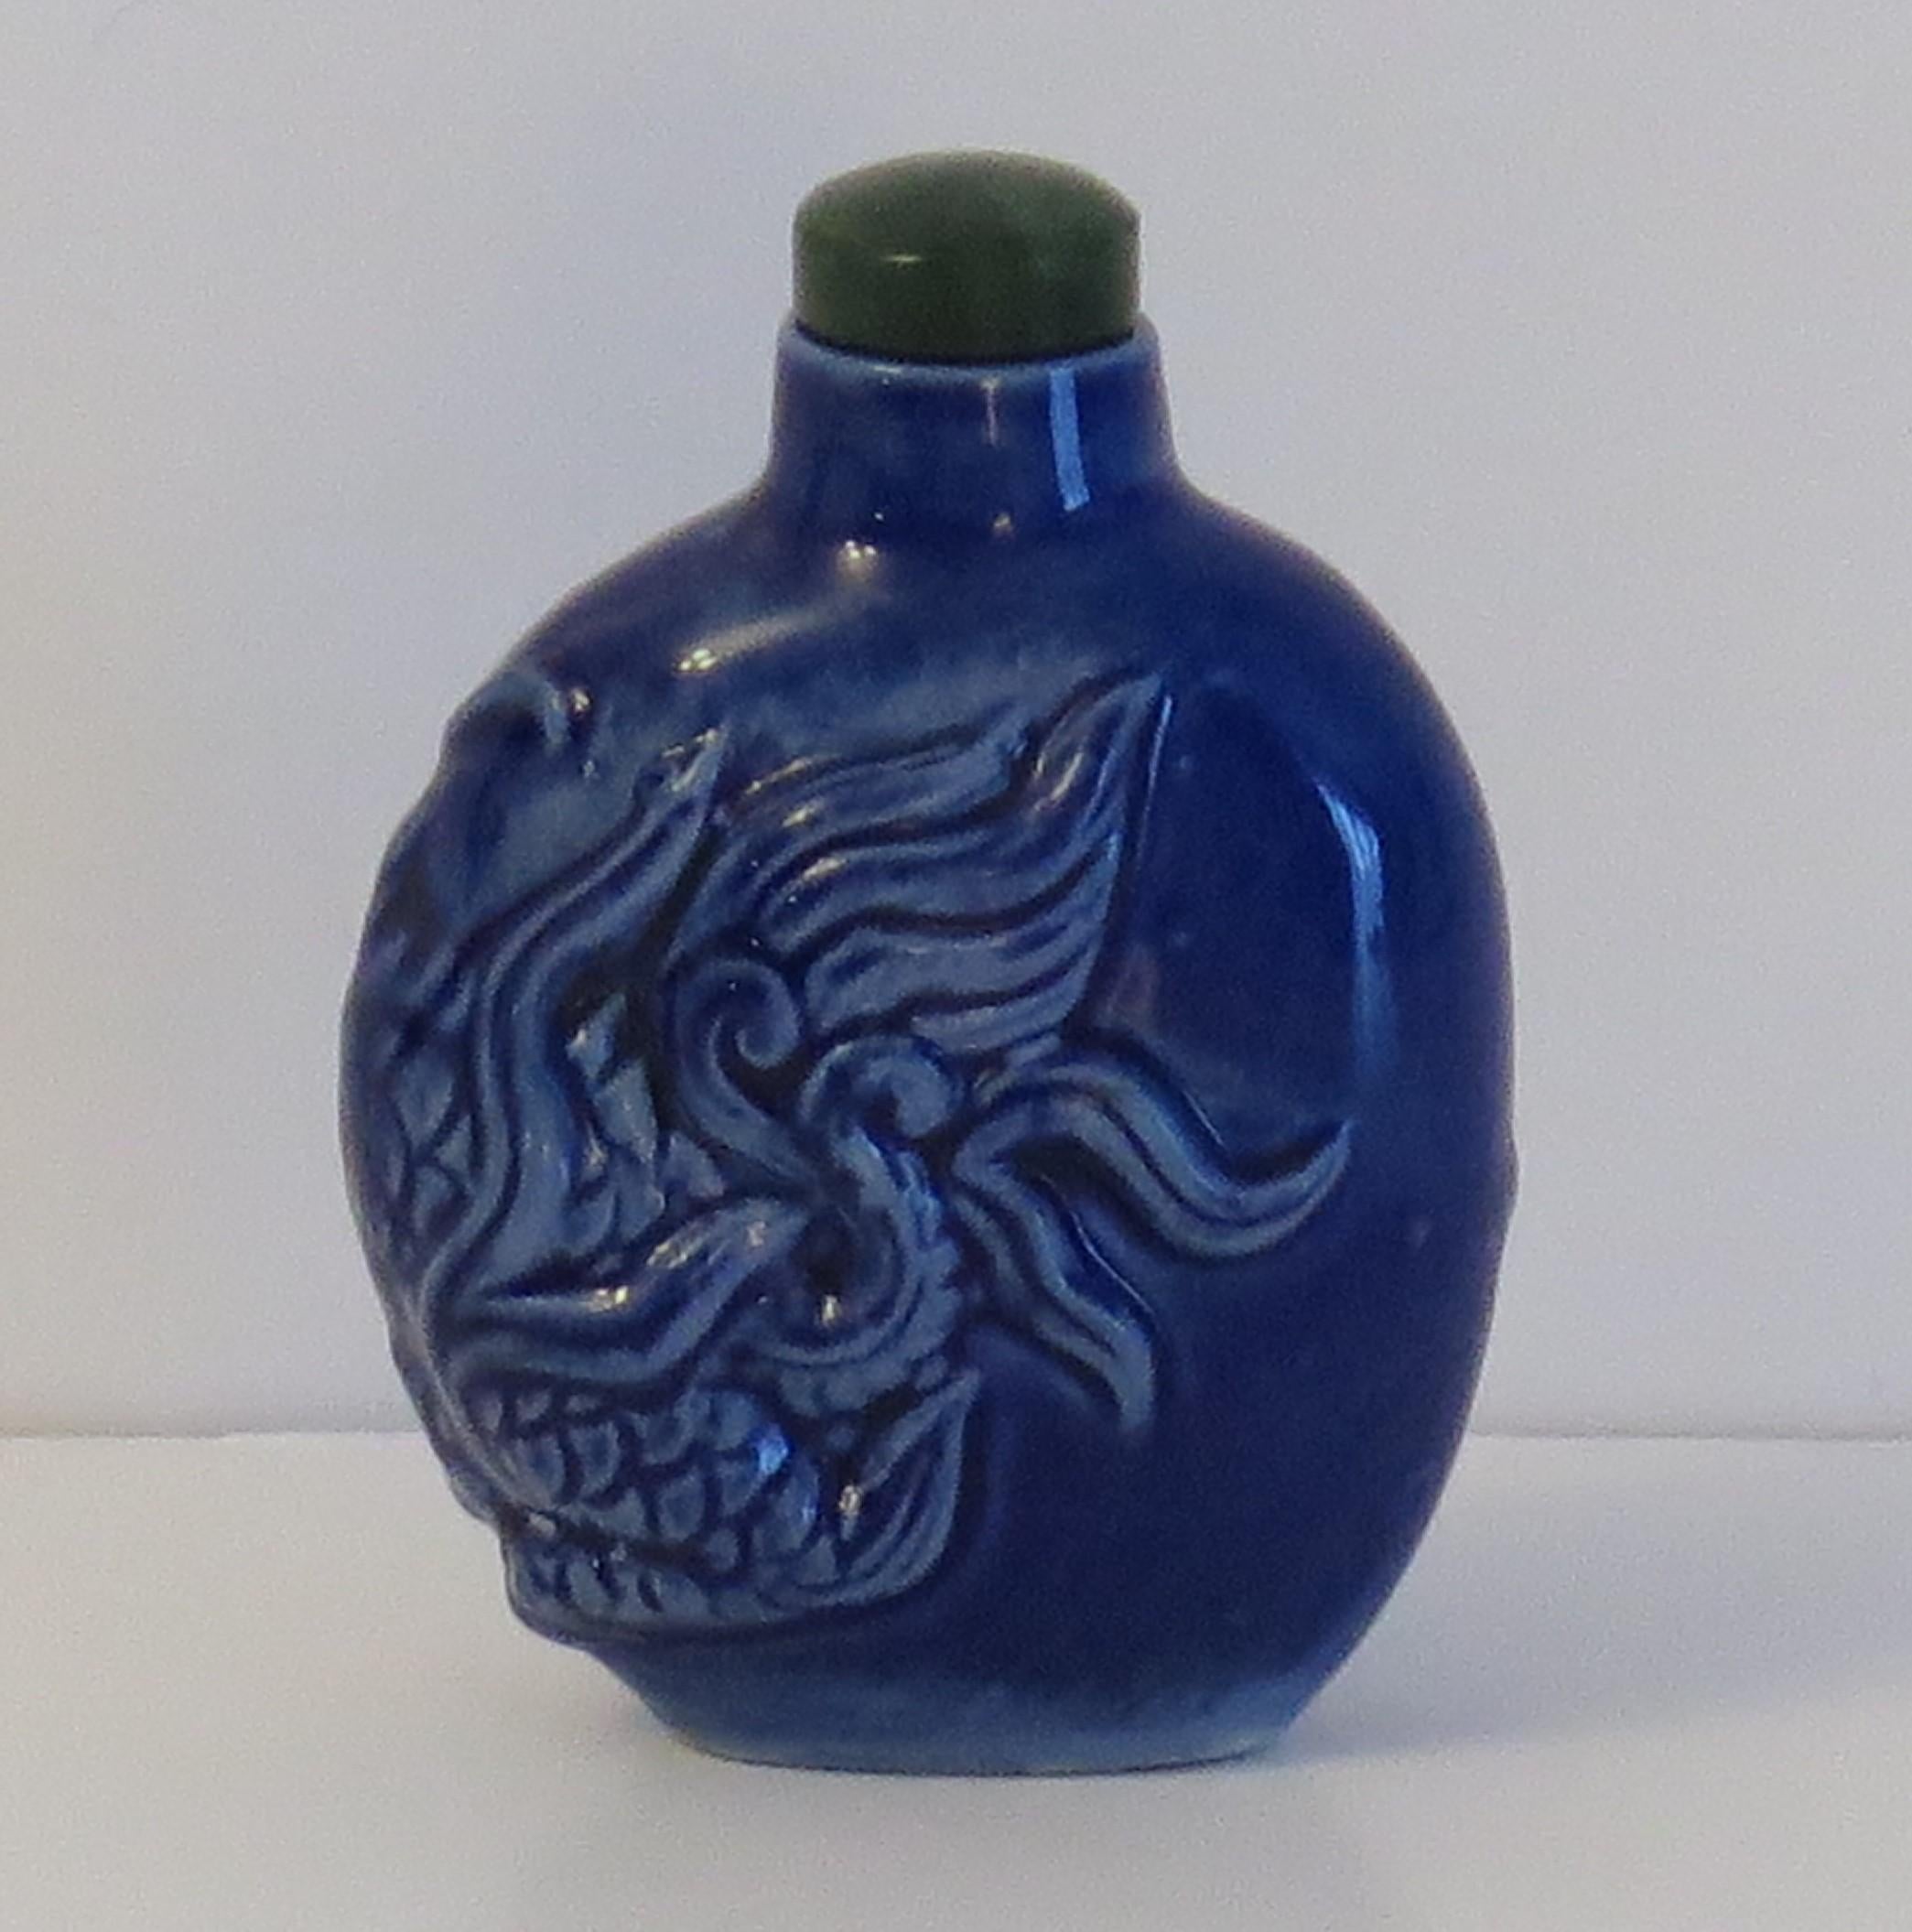 This is a good quality Chinese snuff bottle, made from porcelain with a moulded dragon and stone spoon top, circa 1930.

The ceramic bottle is potted with a molded mythical animal or dragon which covers both sides and one edge. It has been hand